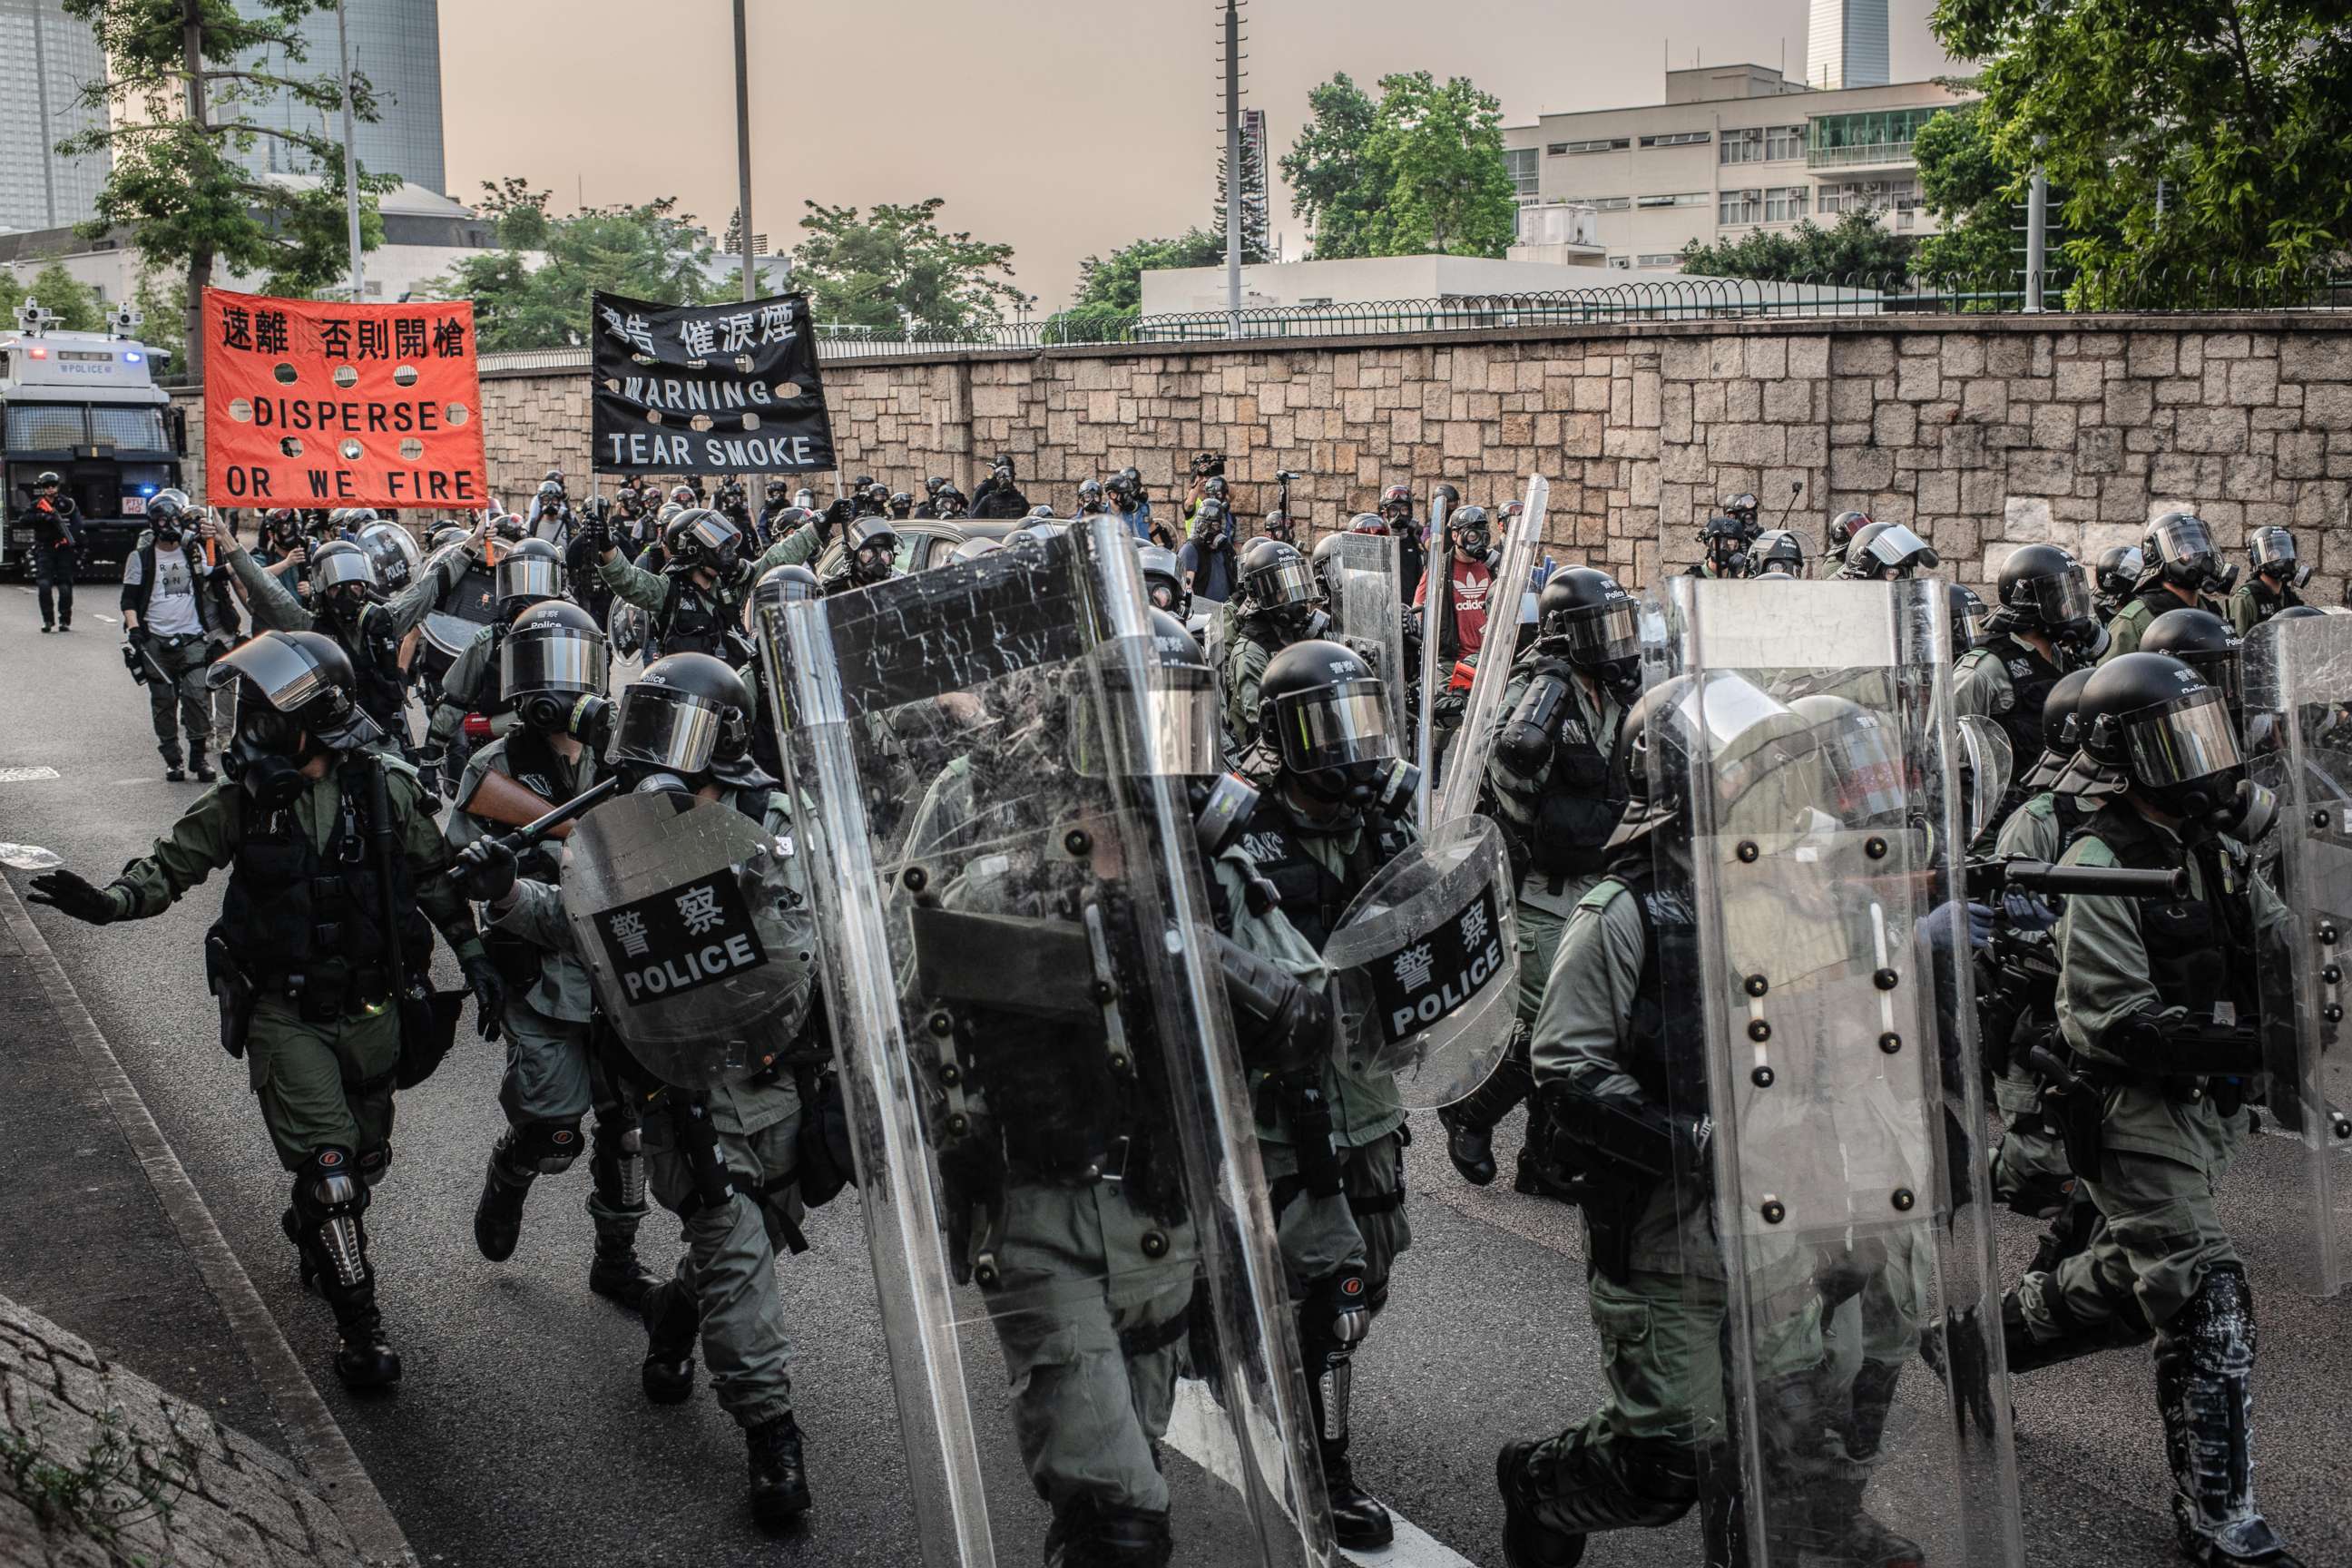 PHOTO: Riot police agents march to clear the surroundings of Legco during a pro-democracy protest in Hong Kong, Sep 15, 2019.